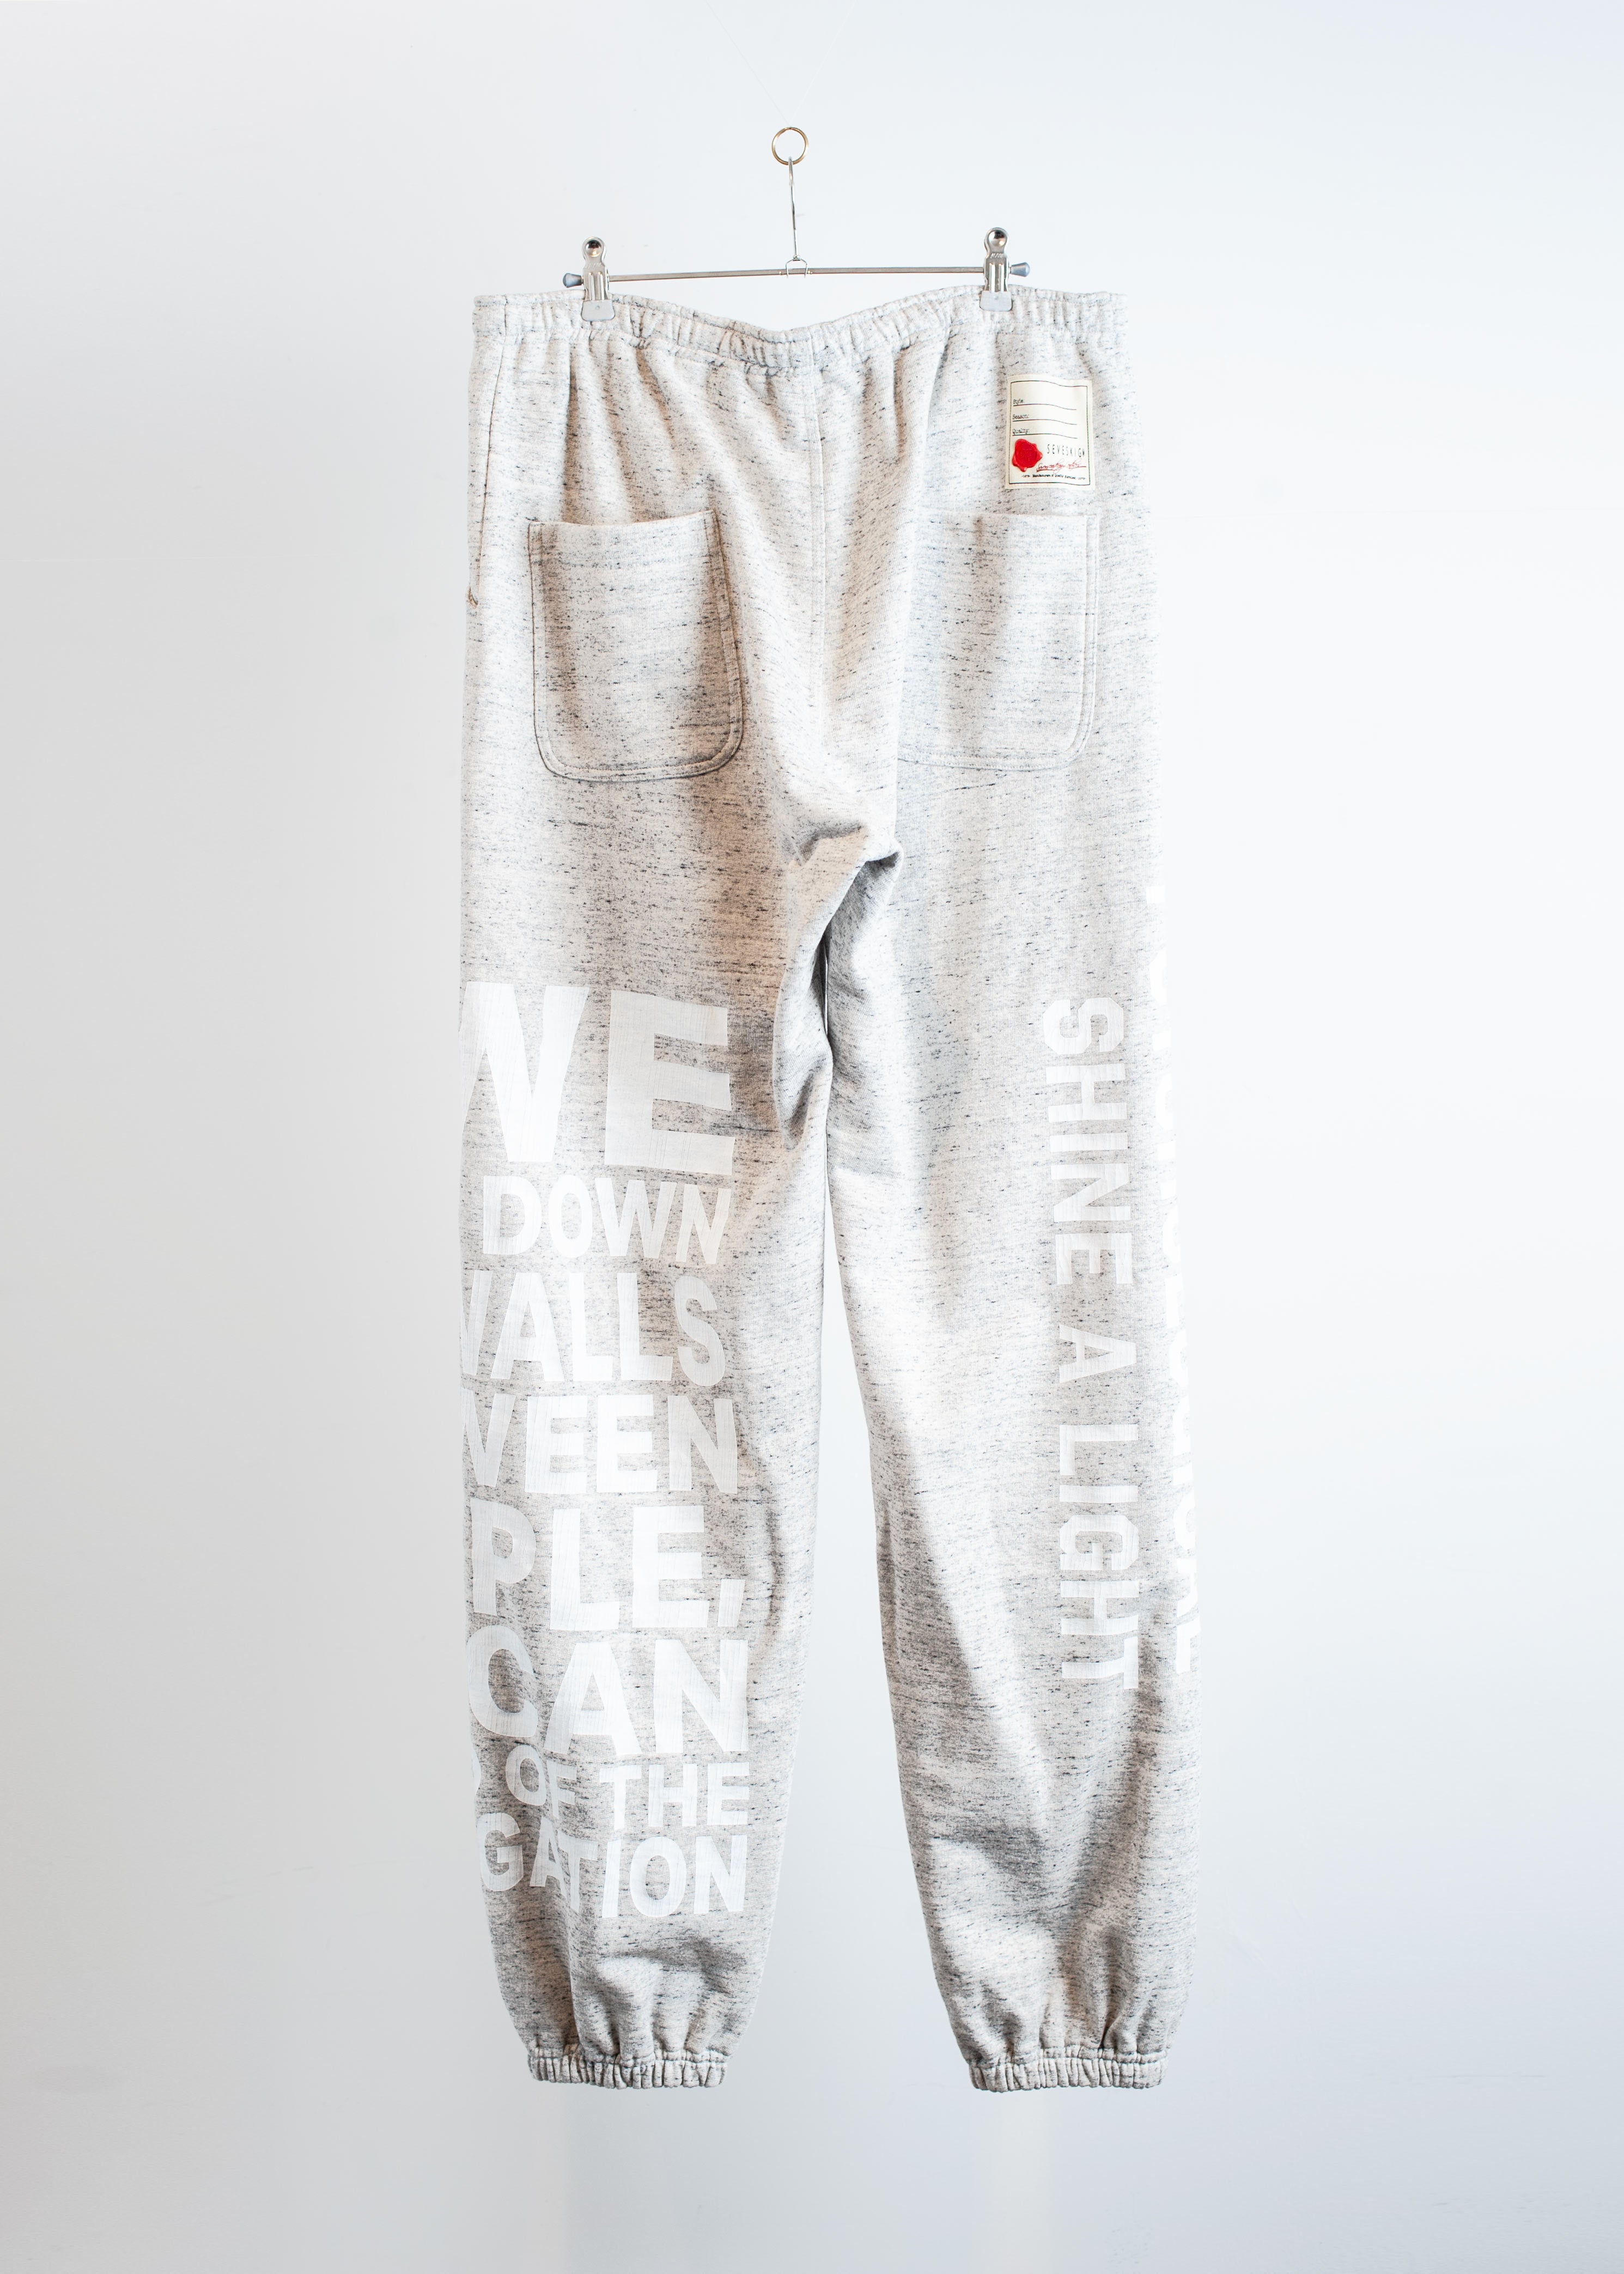 SW-SV-NYS-1002 / Typographic Graffiti Divided Sweat Trousers